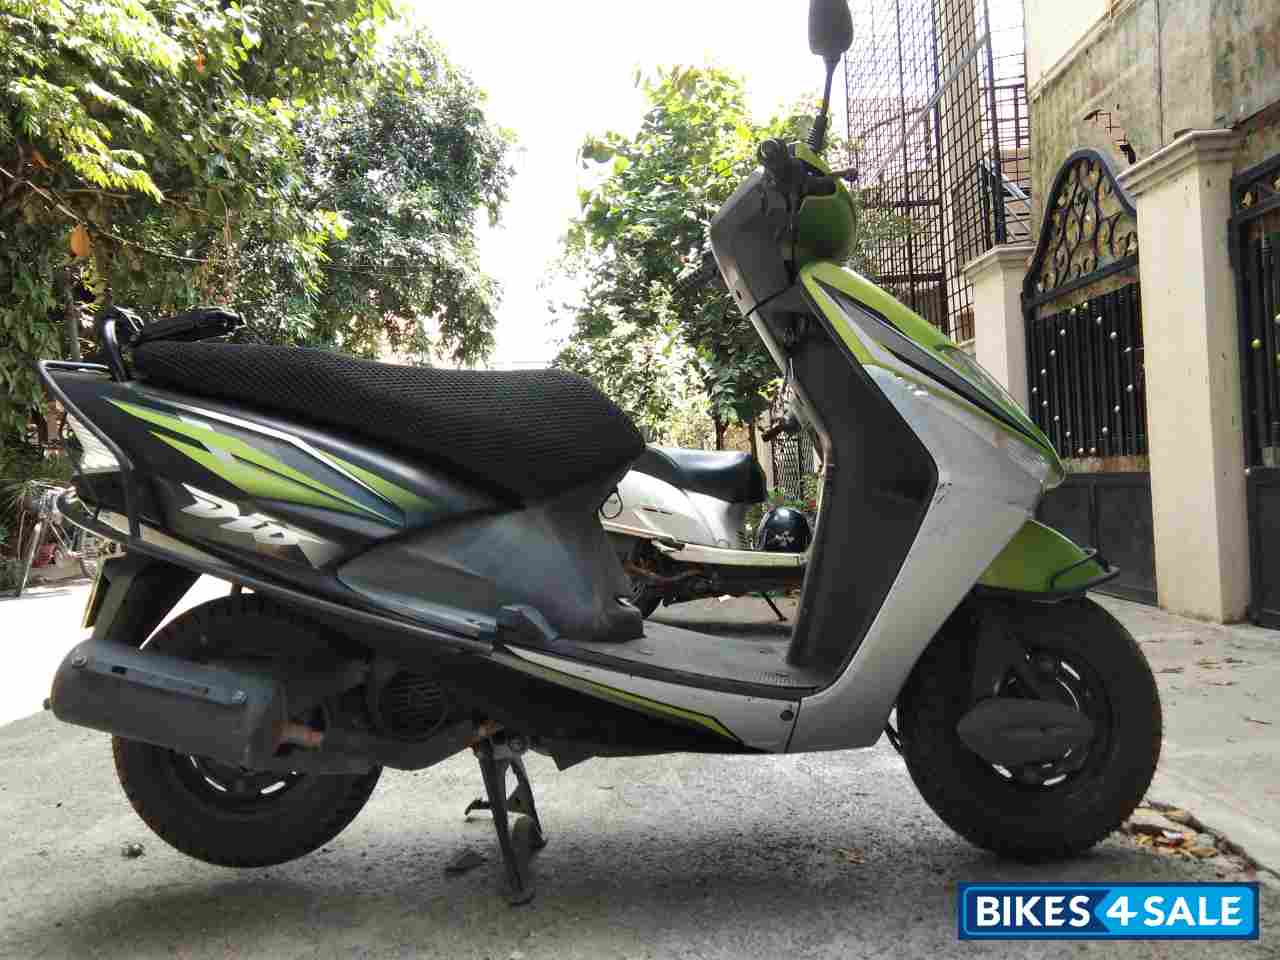 Used Honda Dio for sale in Palakkad. ID 231090 - Bikes4Sale